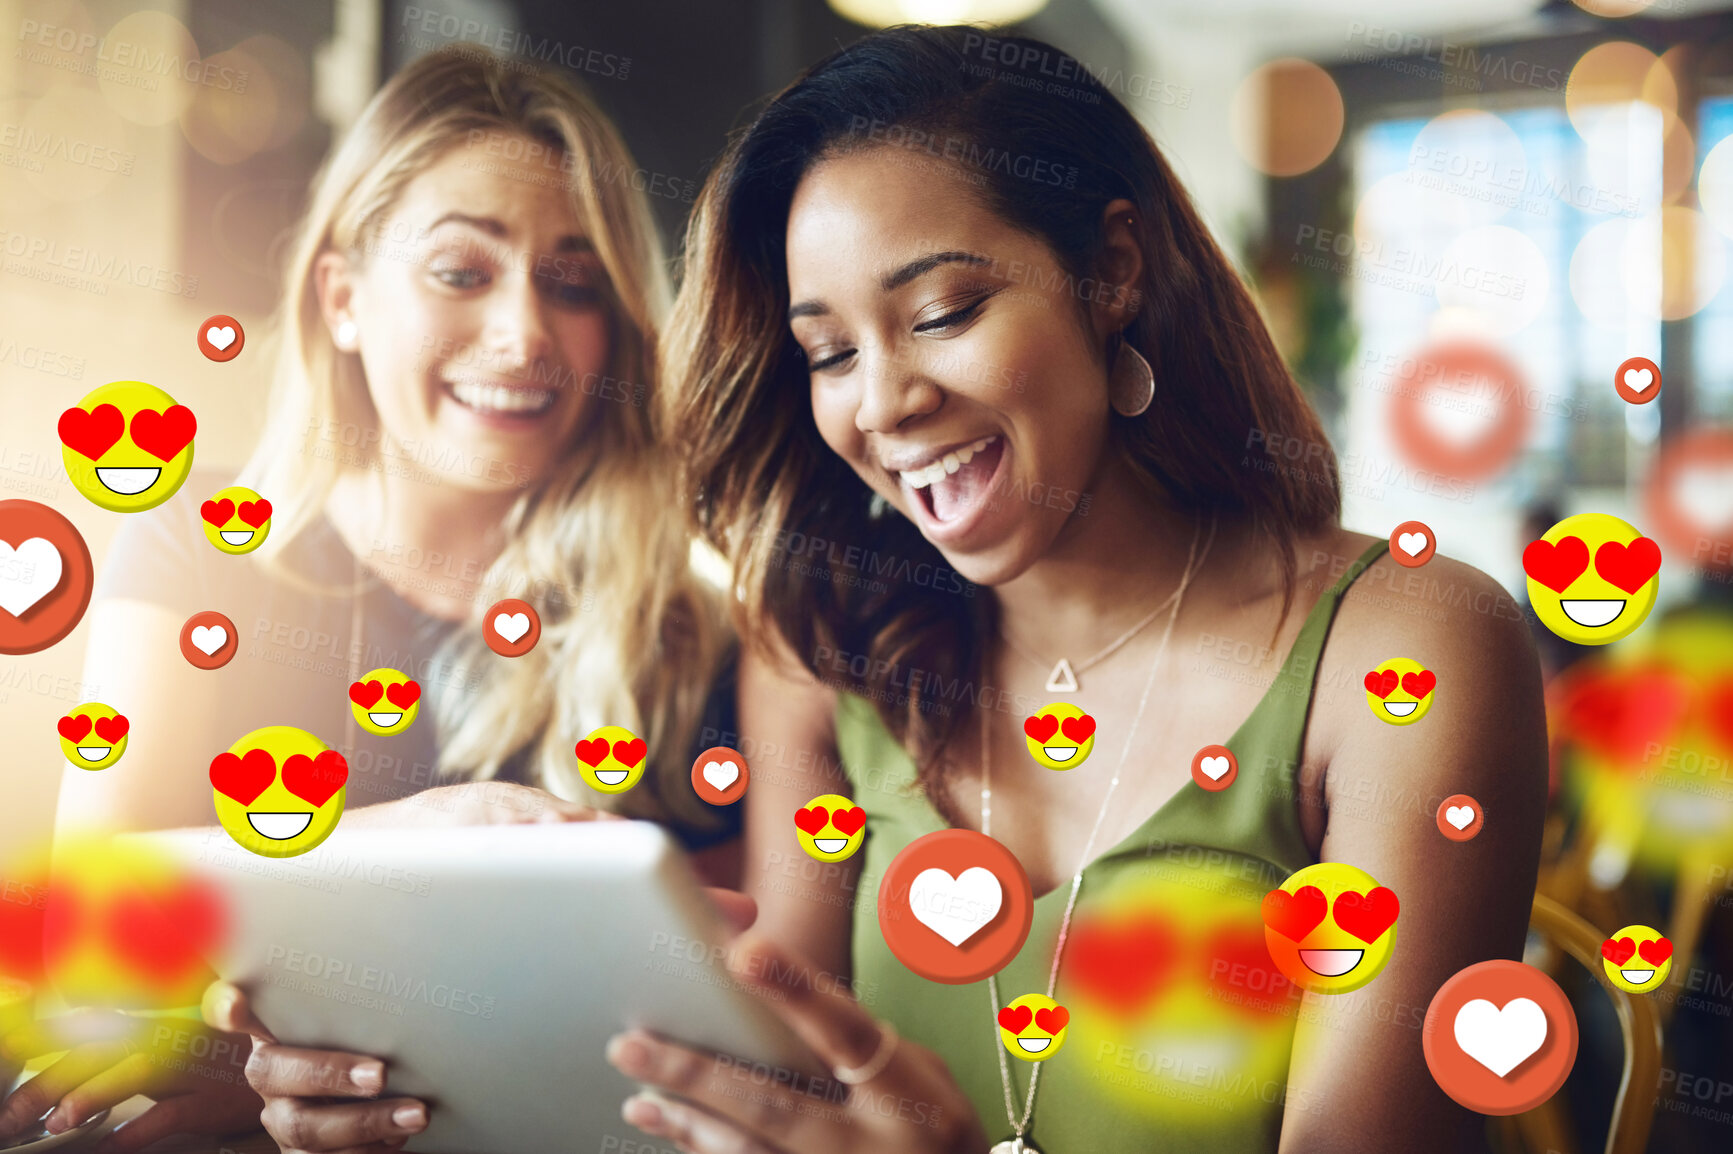 Buy stock photo Happy, online dating icon or friends with tablet for communication or social media texting together. Smile, girls or excited friends on fun website or digital network with love, like or heart emoji 